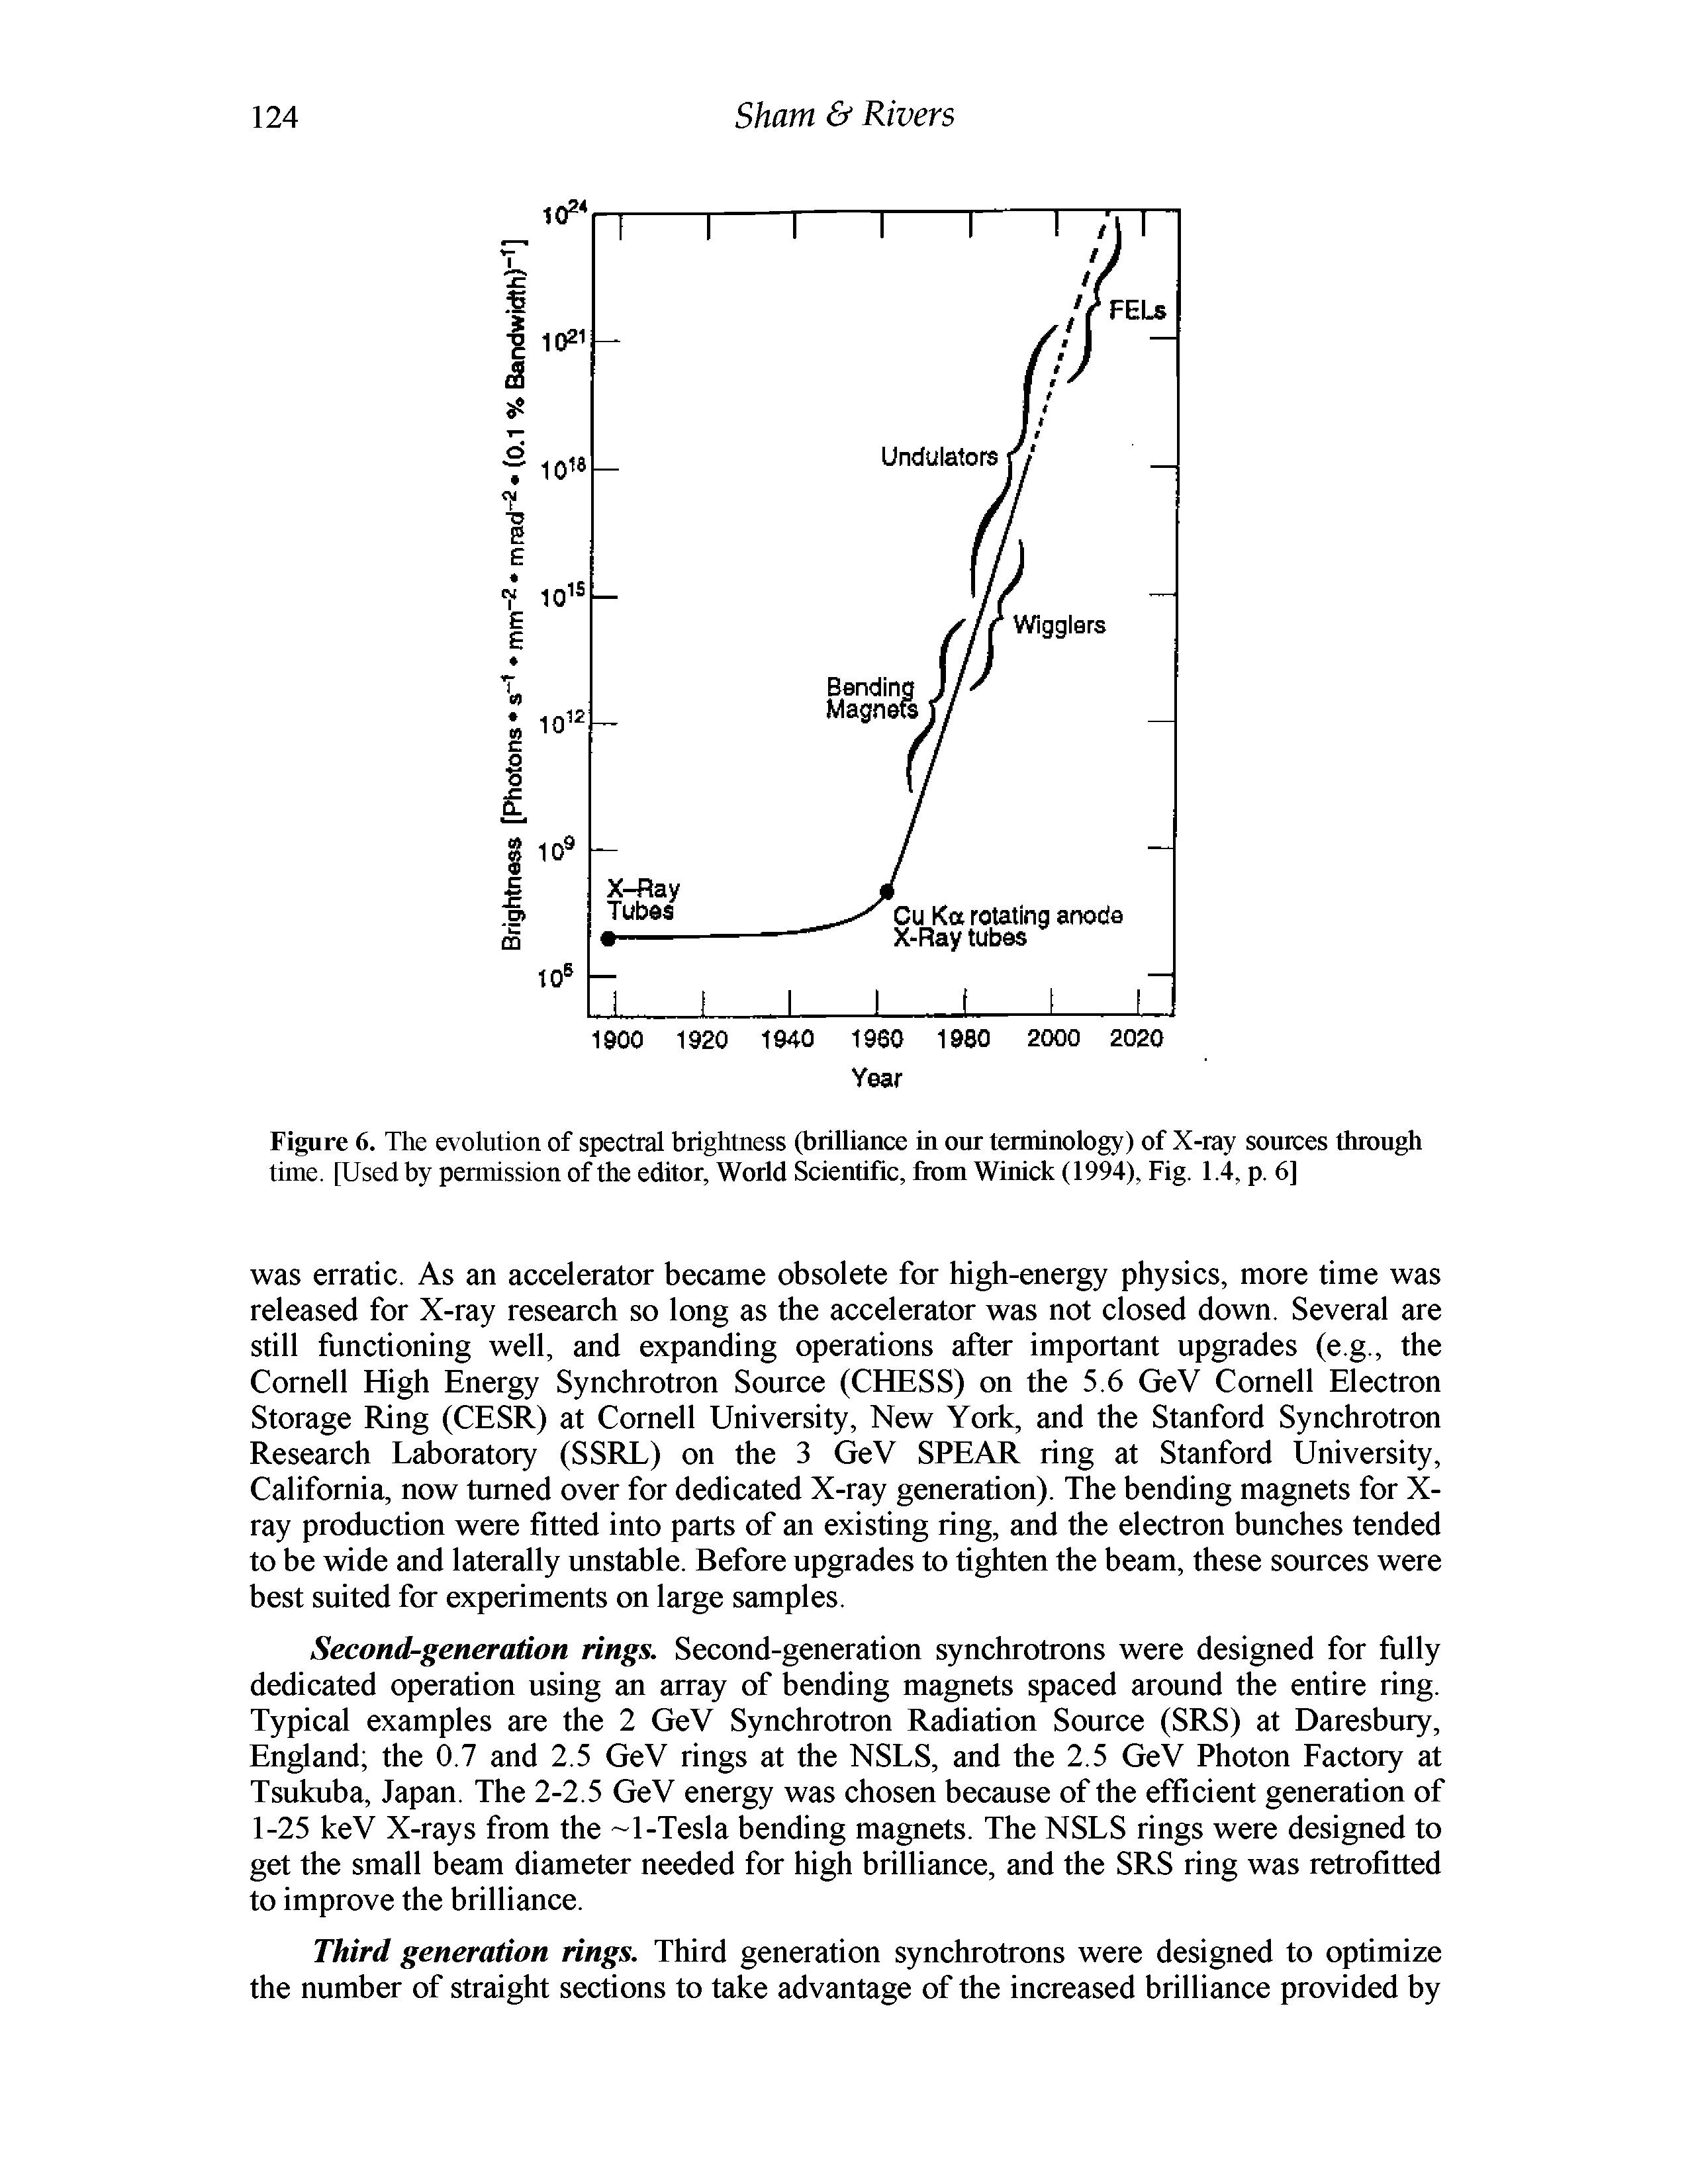 Figure 6. The evolution of spectral brightness (brilliance in our terminology) of -ray sources through time. [Used by permission of the editor, World Scientific, from Winick (1994), Fig. 1.4, p. 6]...